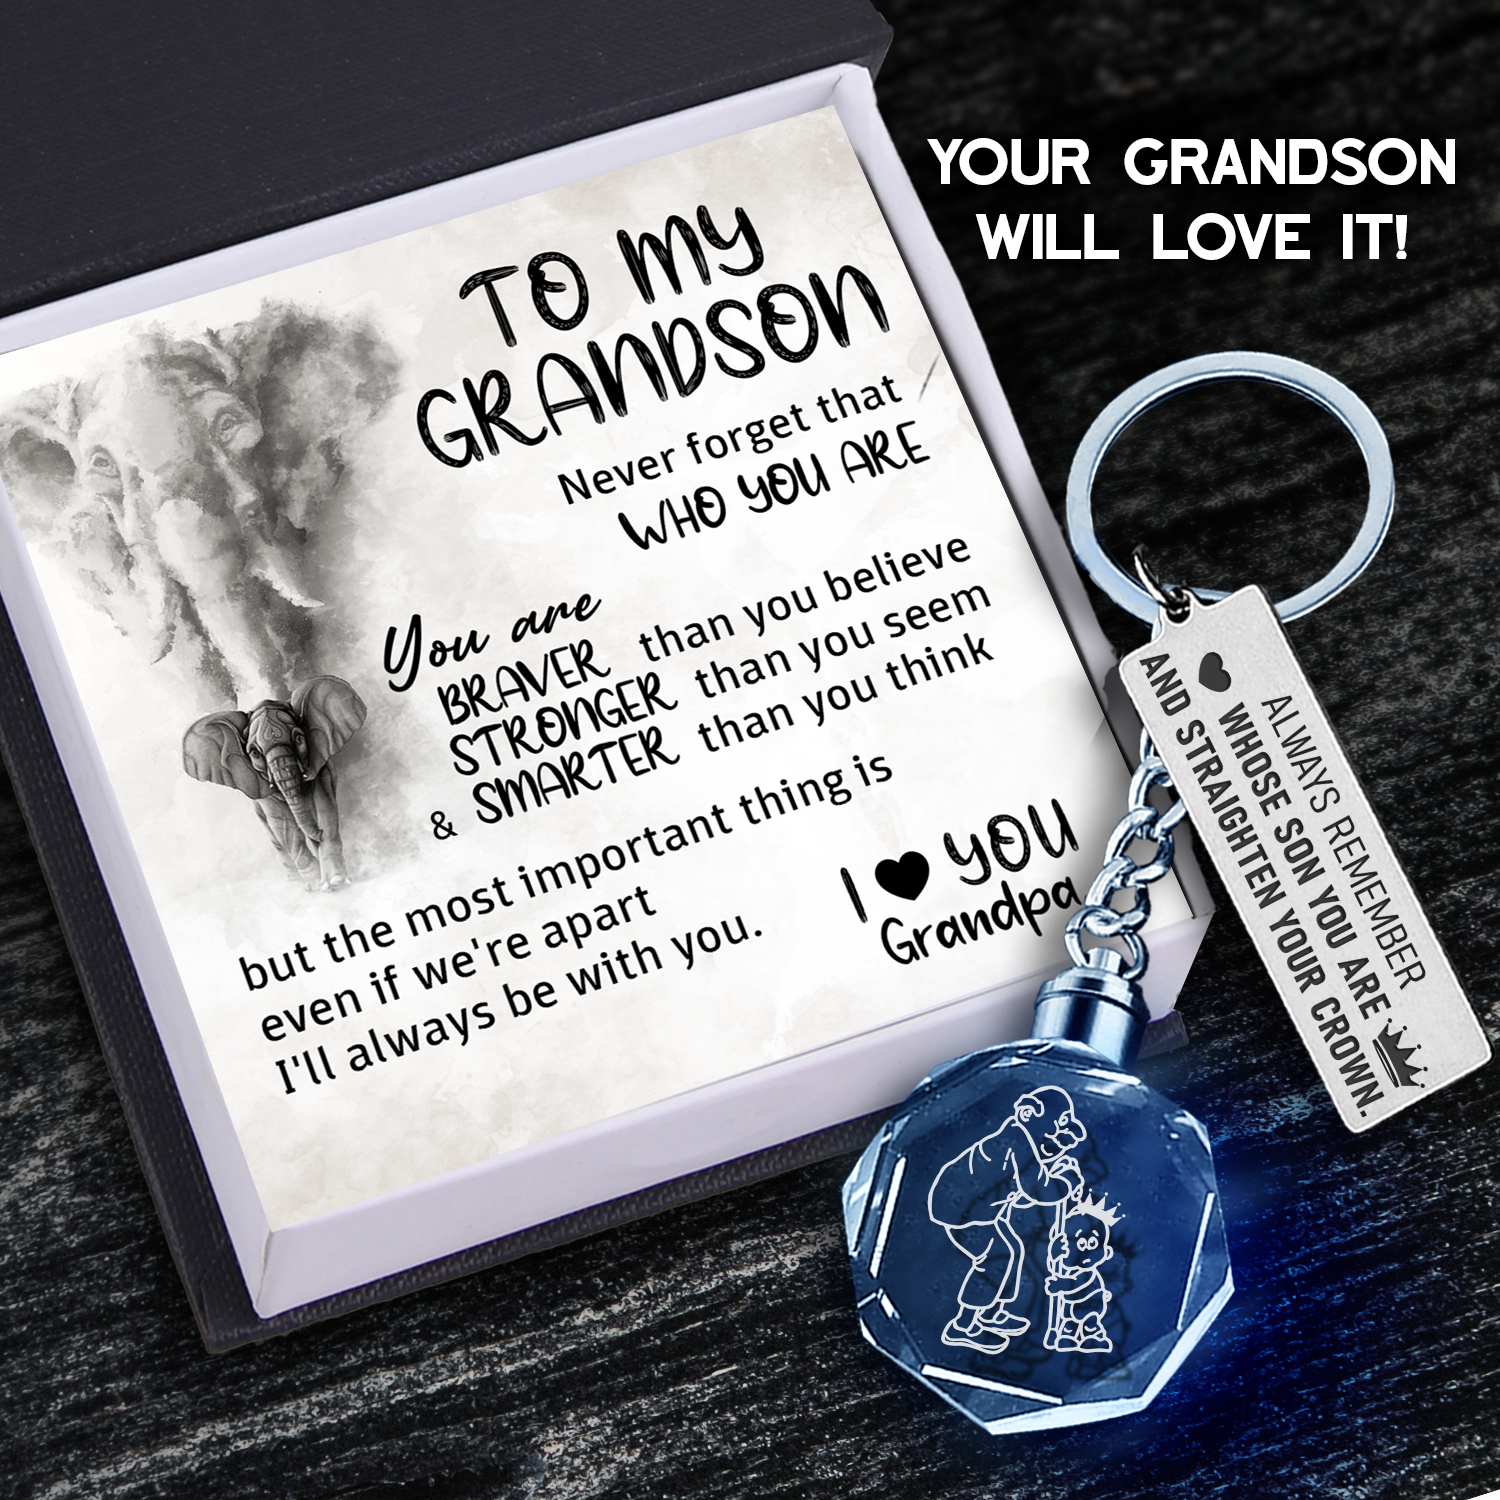 Led Light Keychain - Family - To My Grandson - Never Forget That Who You Are - Ukgkwl22002